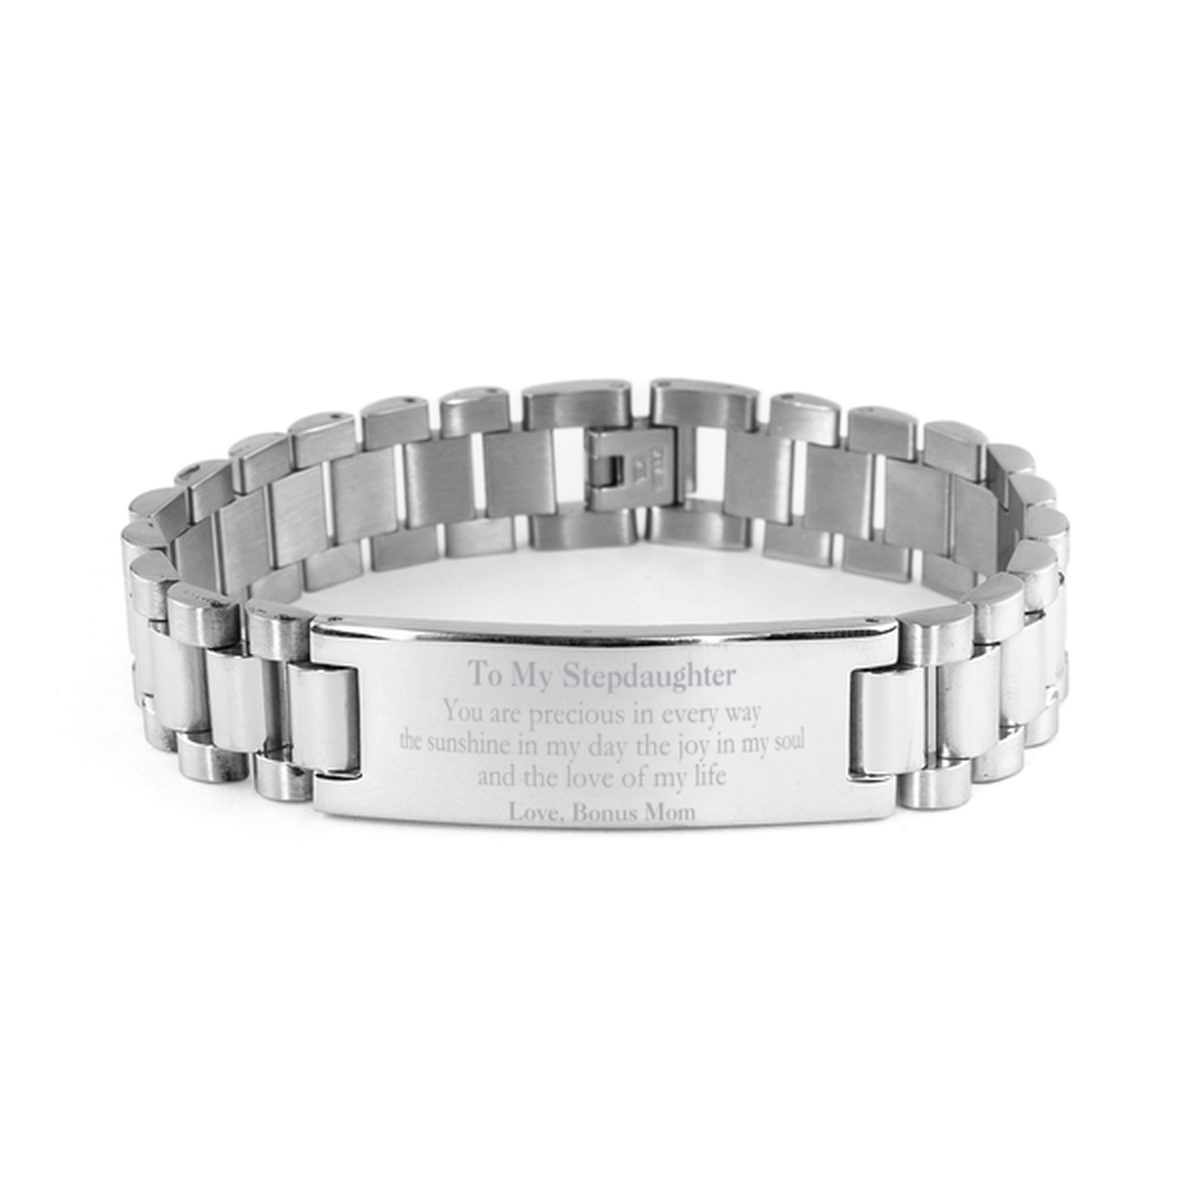 Graduation Gifts for Stepdaughter Ladder Stainless Steel Bracelet Present from Bonus Mom, Christmas Stepdaughter Birthday Gifts Stepdaughter You are precious in every way the sunshine in my day. Love, Bonus Mom